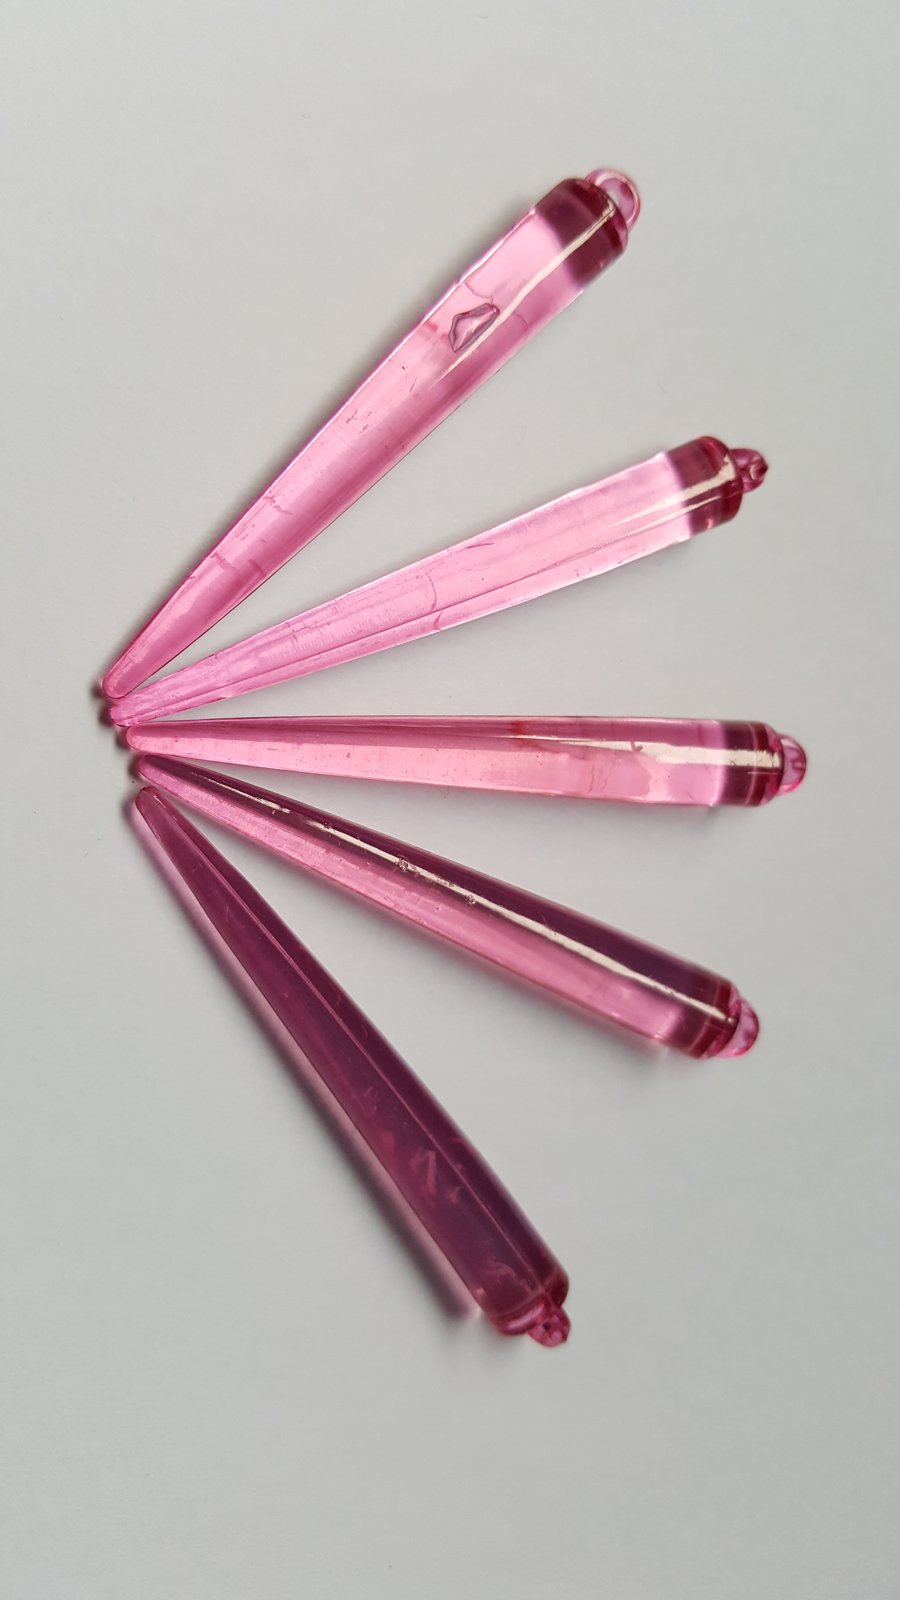 15 x Acrylic Spike Pendant Drops - 52mm - Bright Pink 